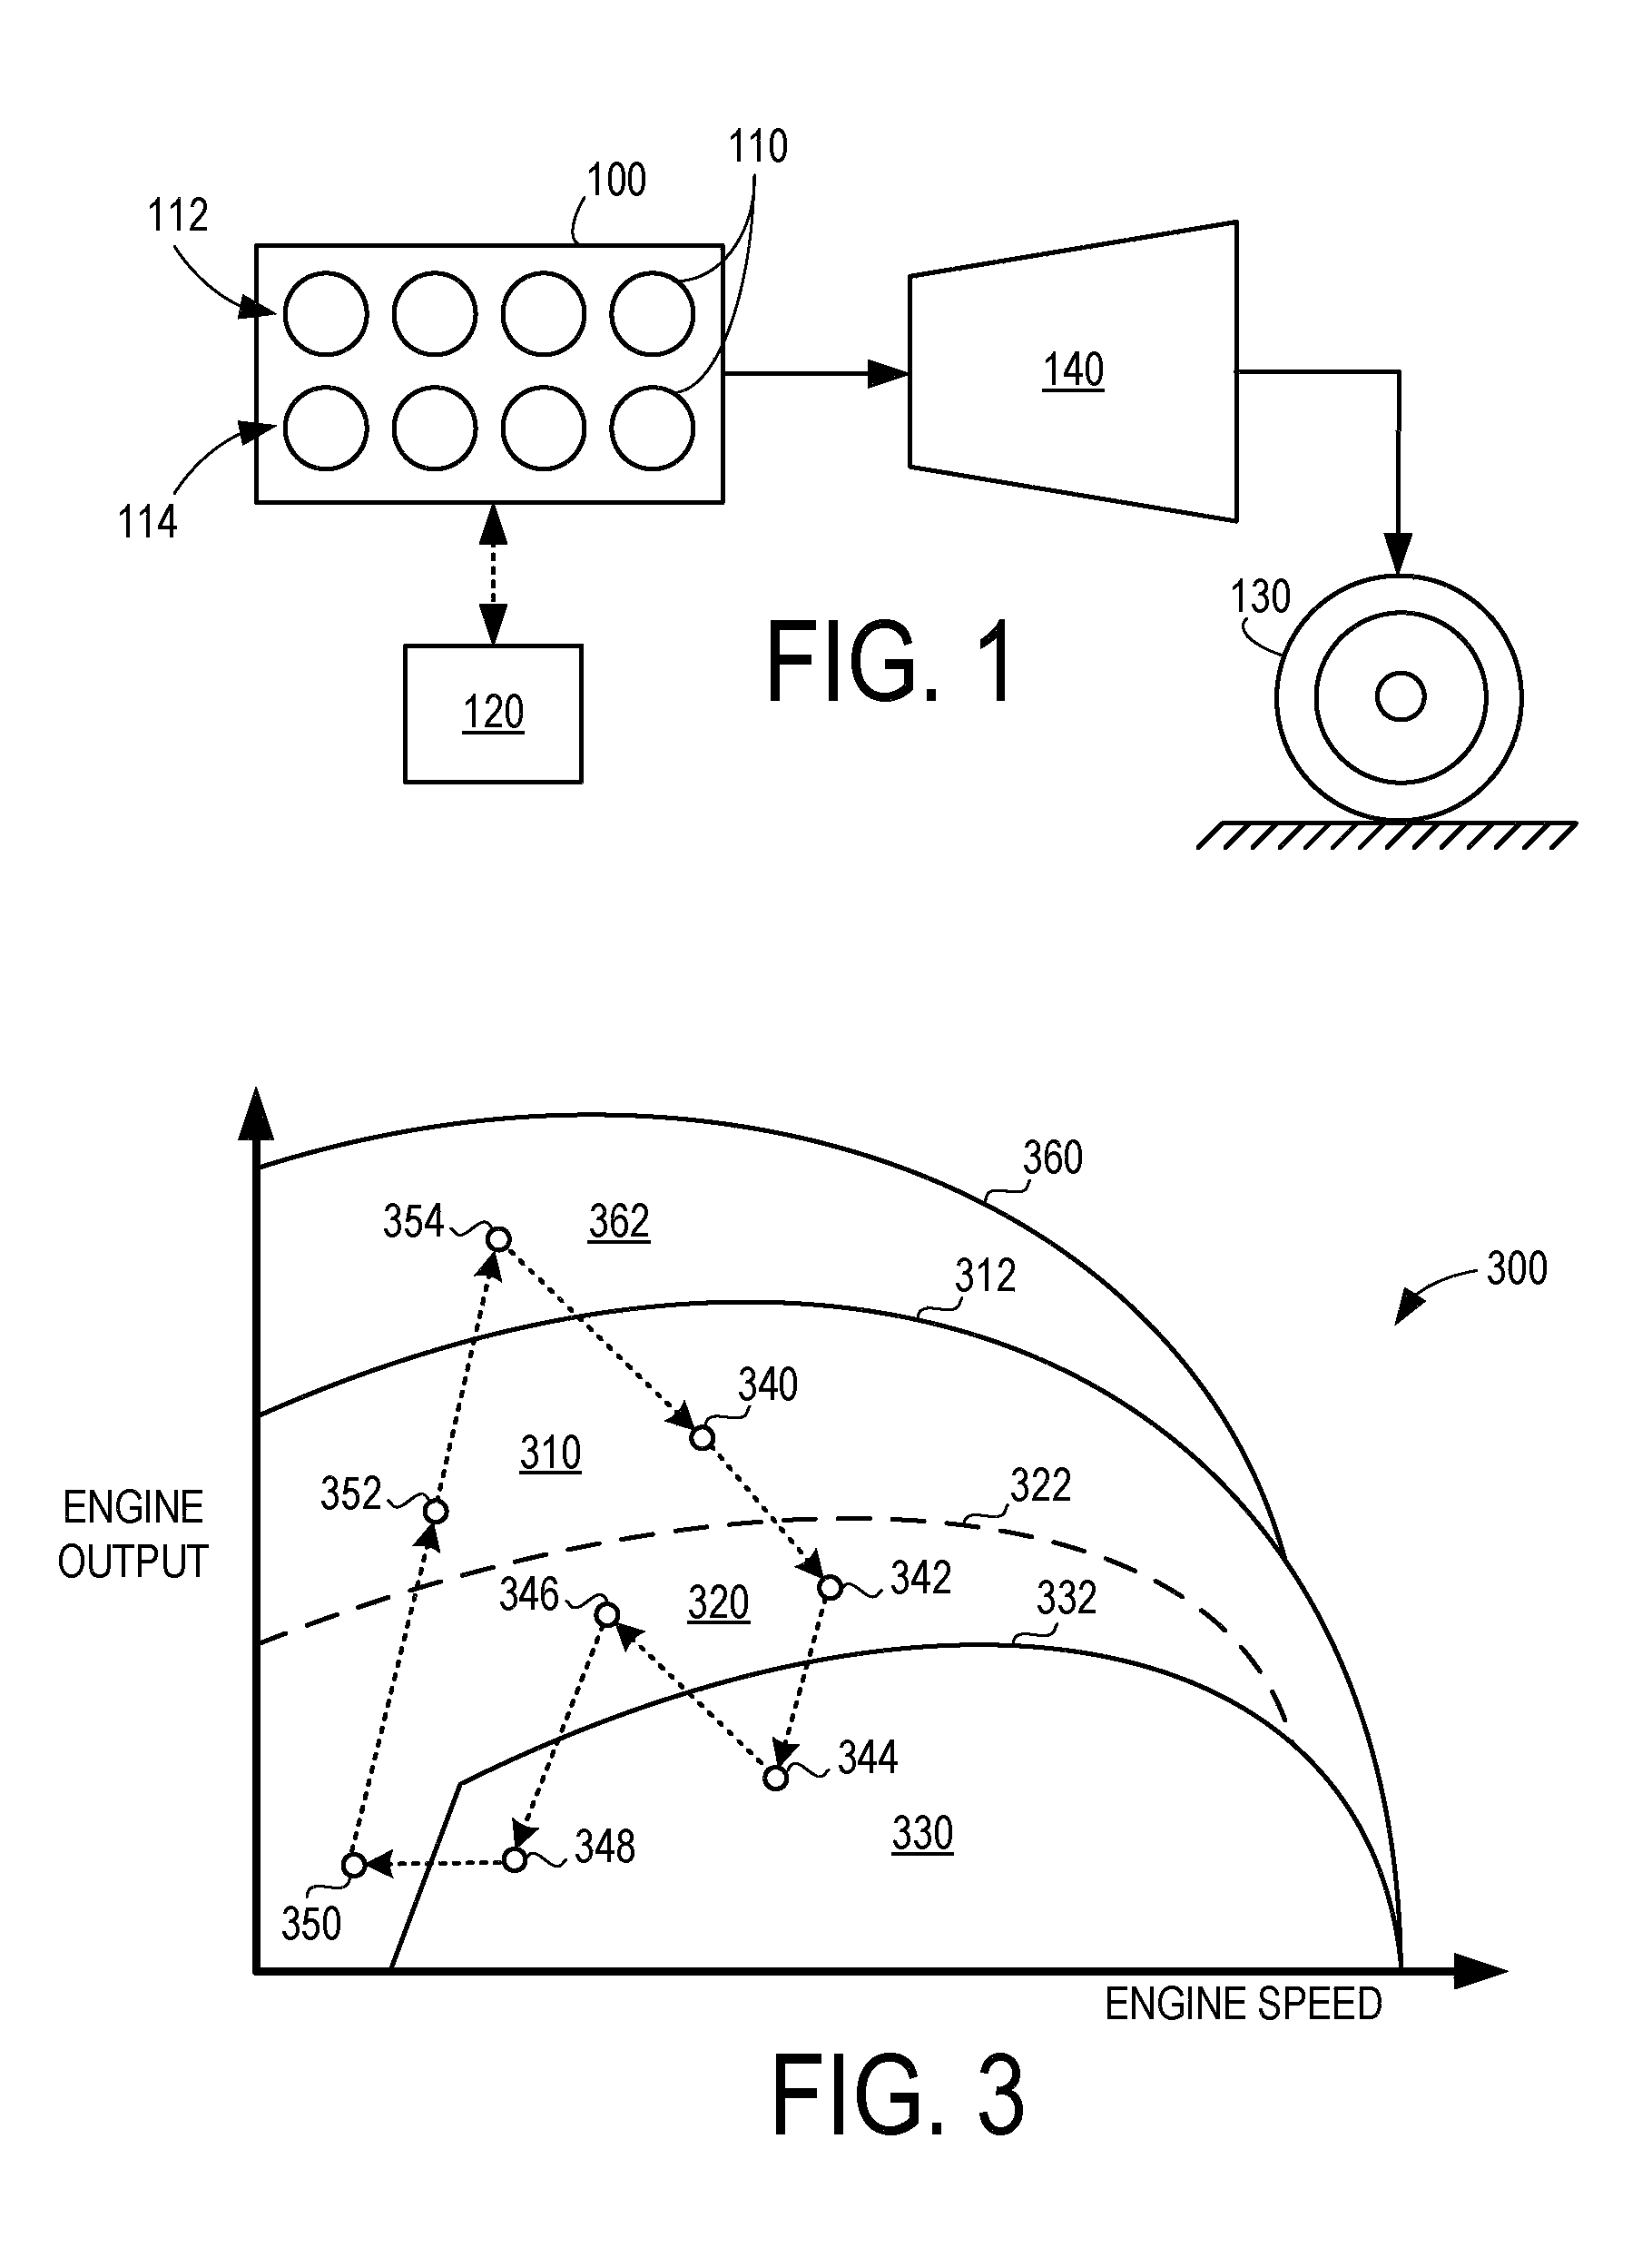 Multi-stroke variable displacement engine